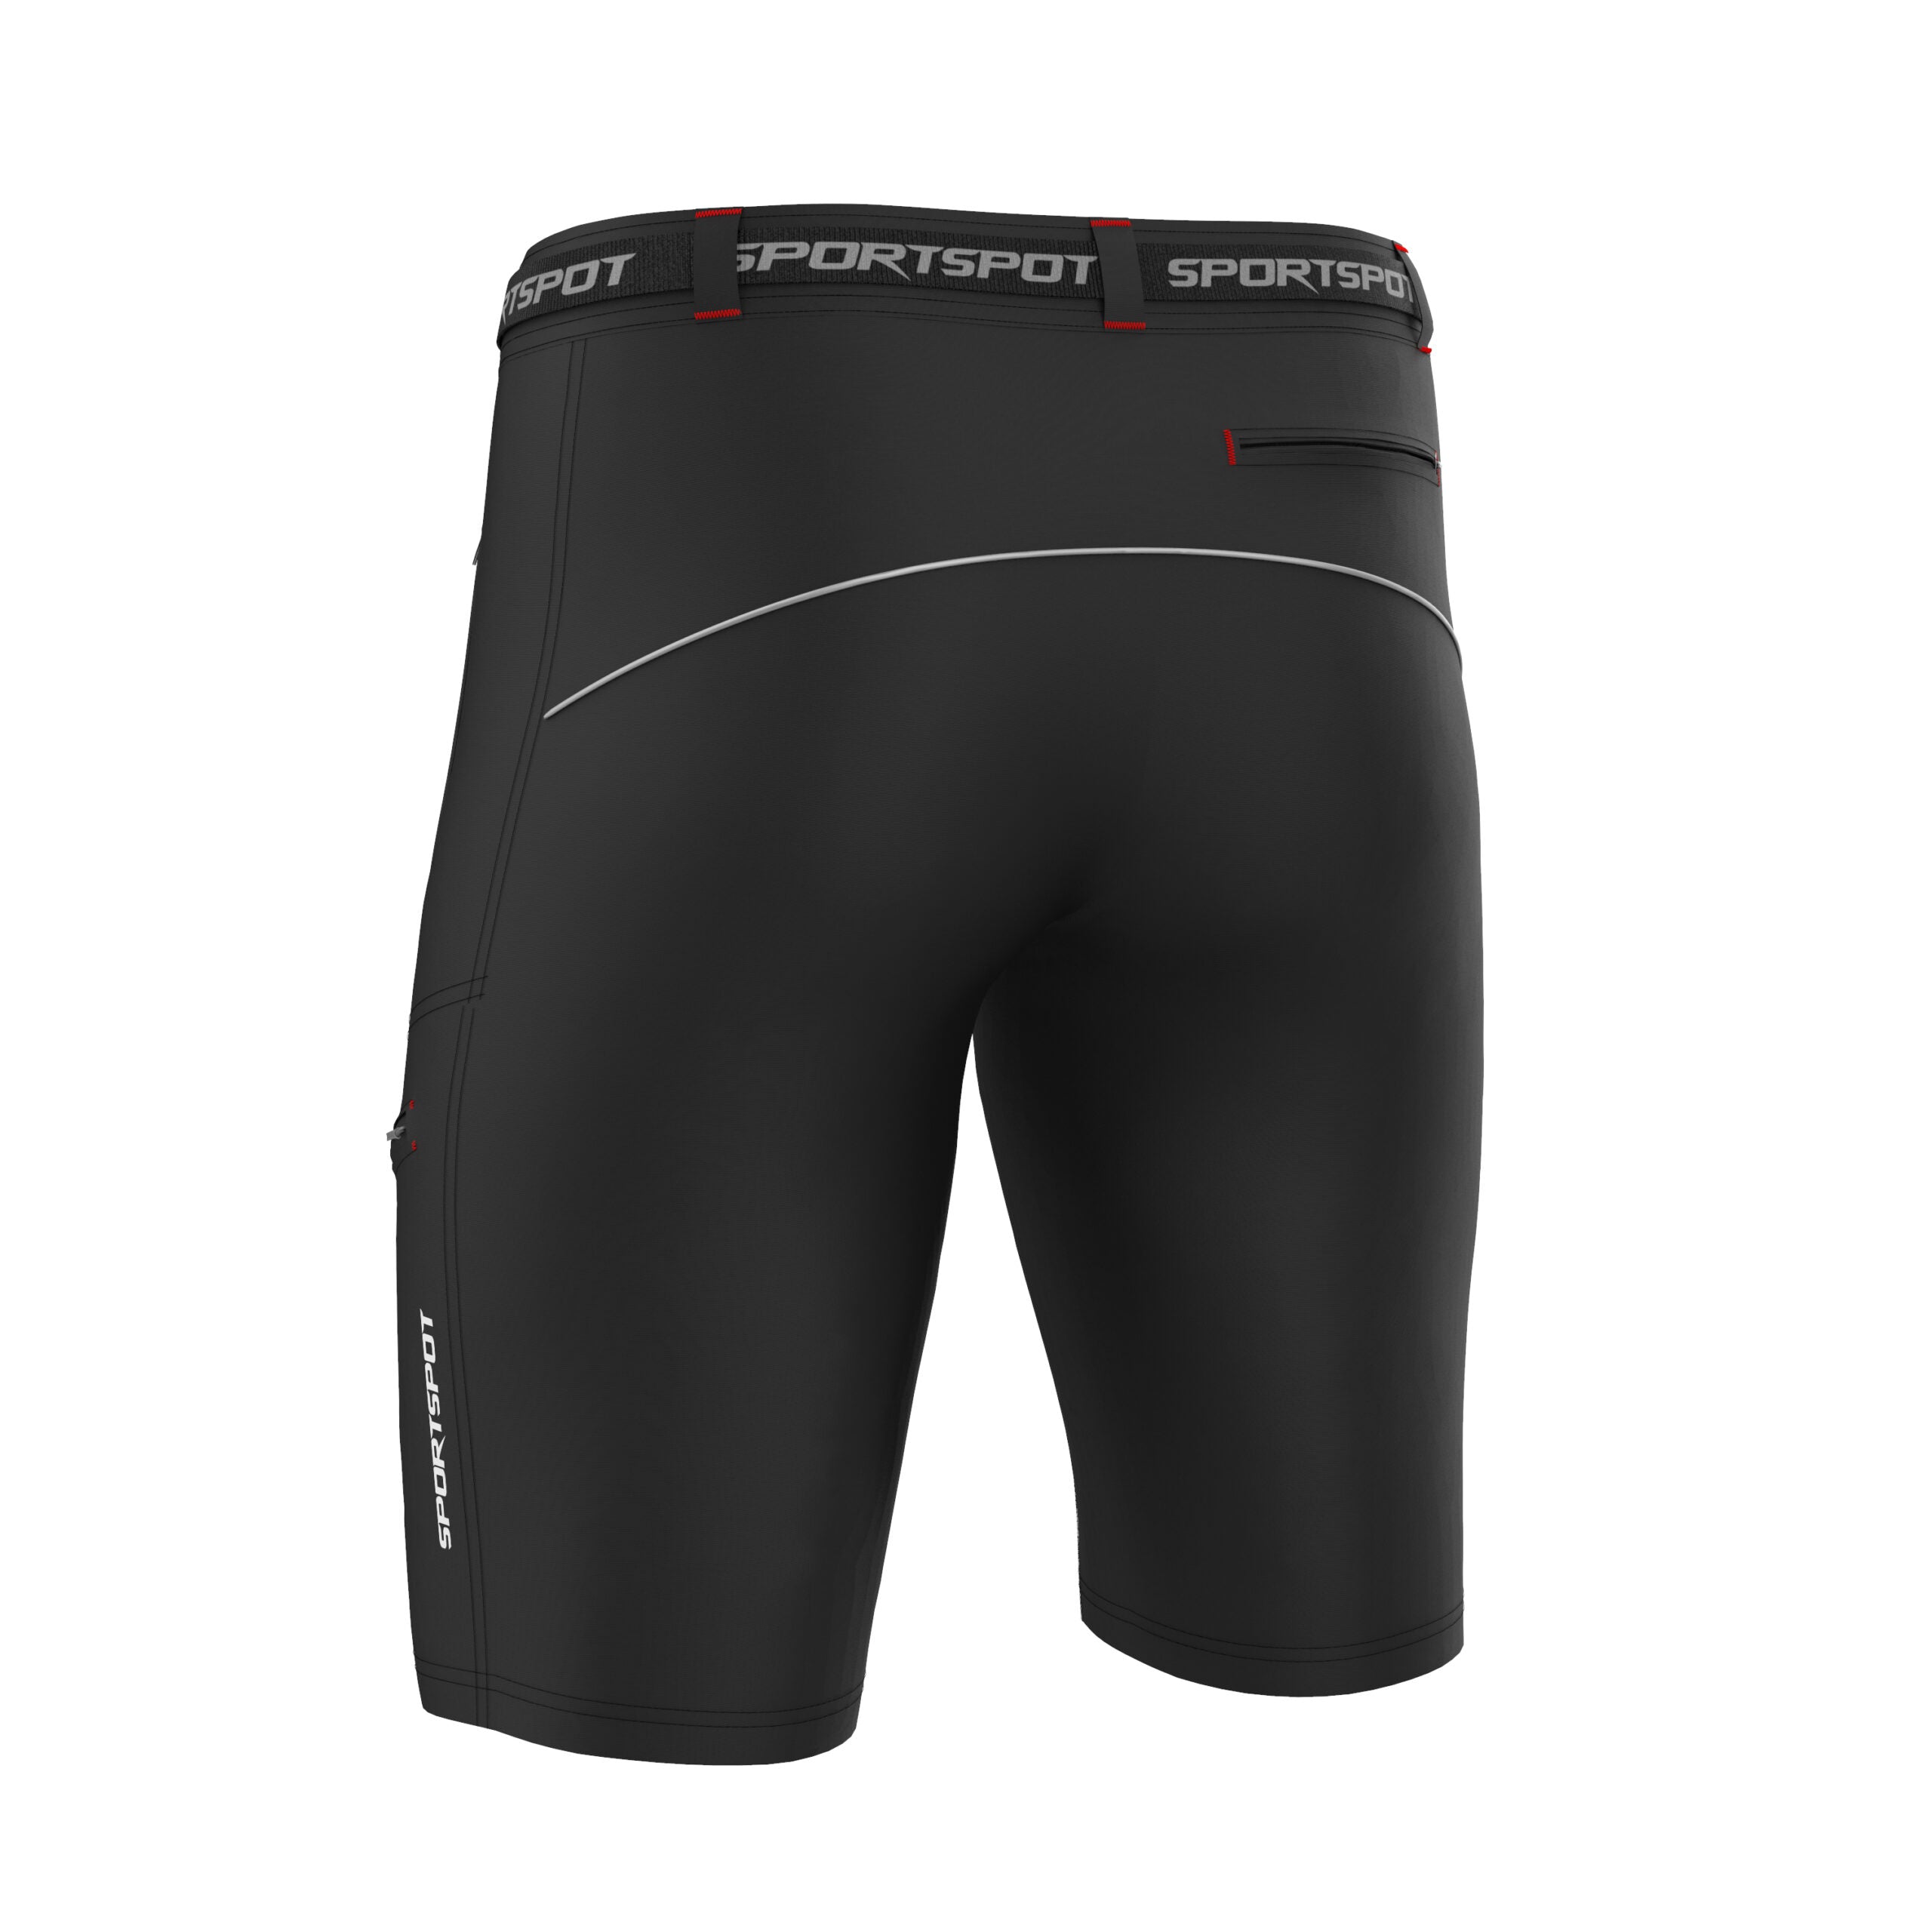 mtb mountain biking shorts with underpants and zippered pockets